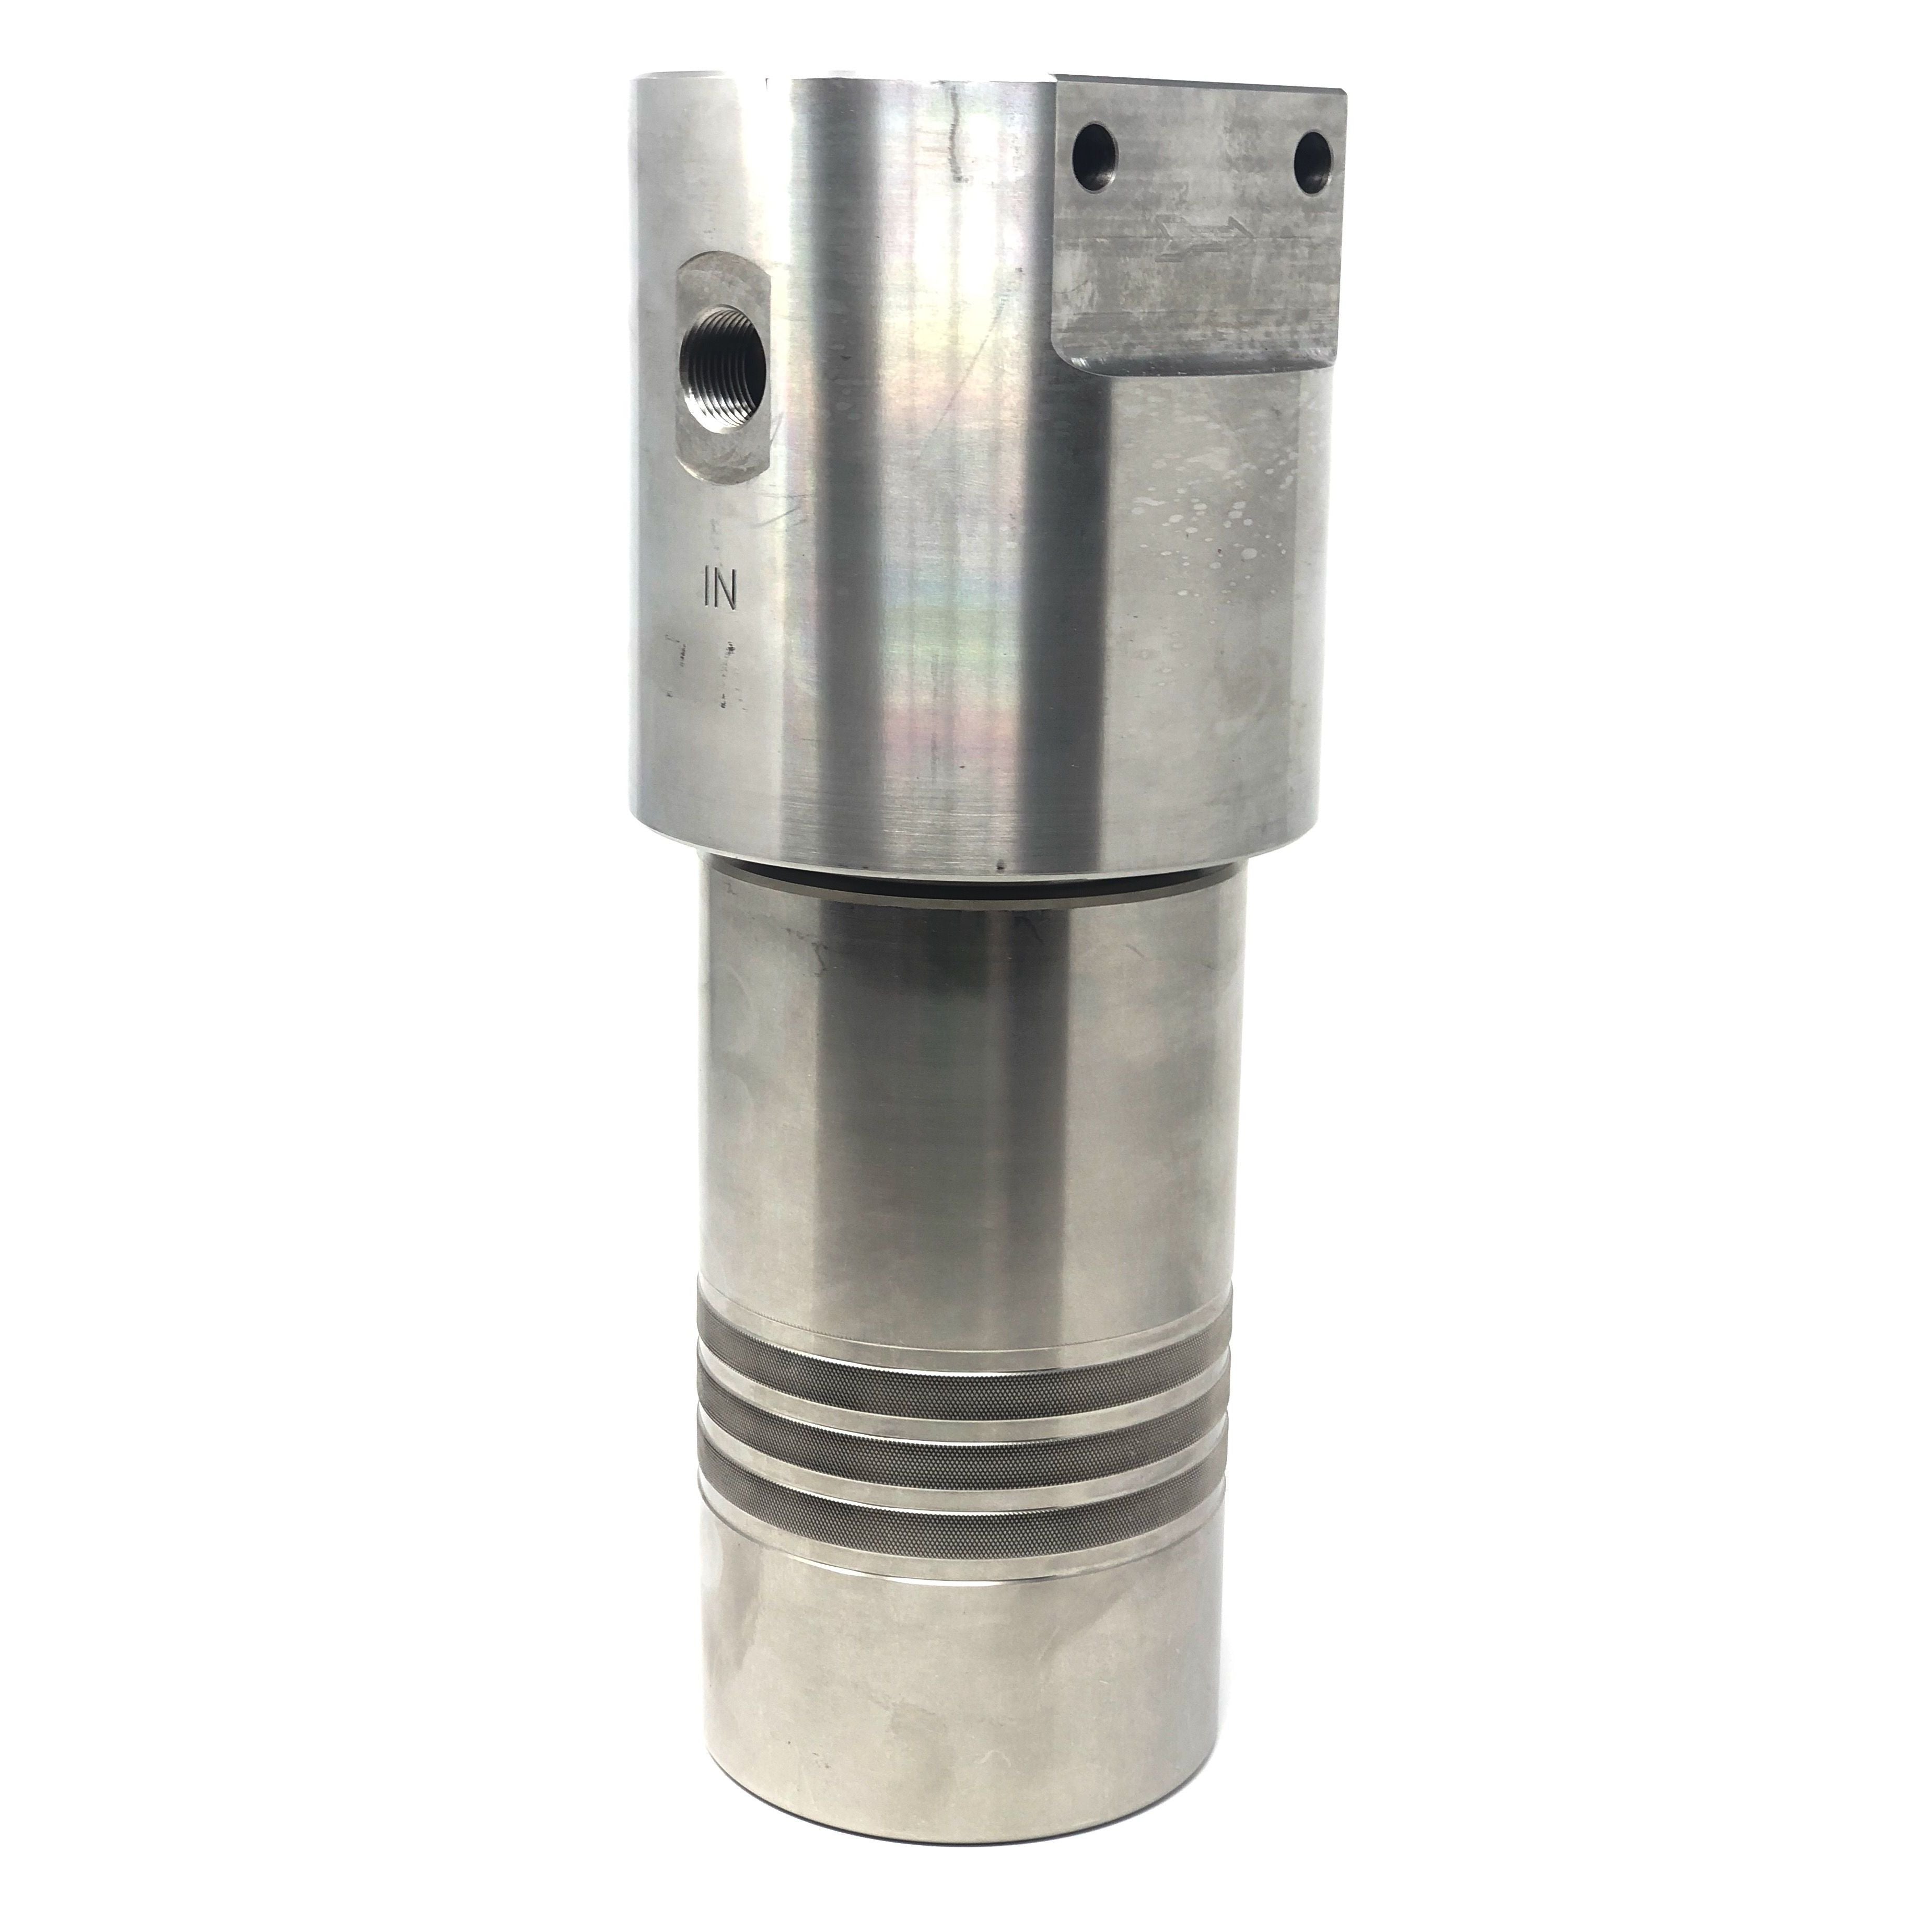 52S-244S-10SEN : Chase Ultra High Pressure Inline Filter, 10000psi, #4 SAE (1/4"), 10 Micron, With Visual Indicator, No Bypass